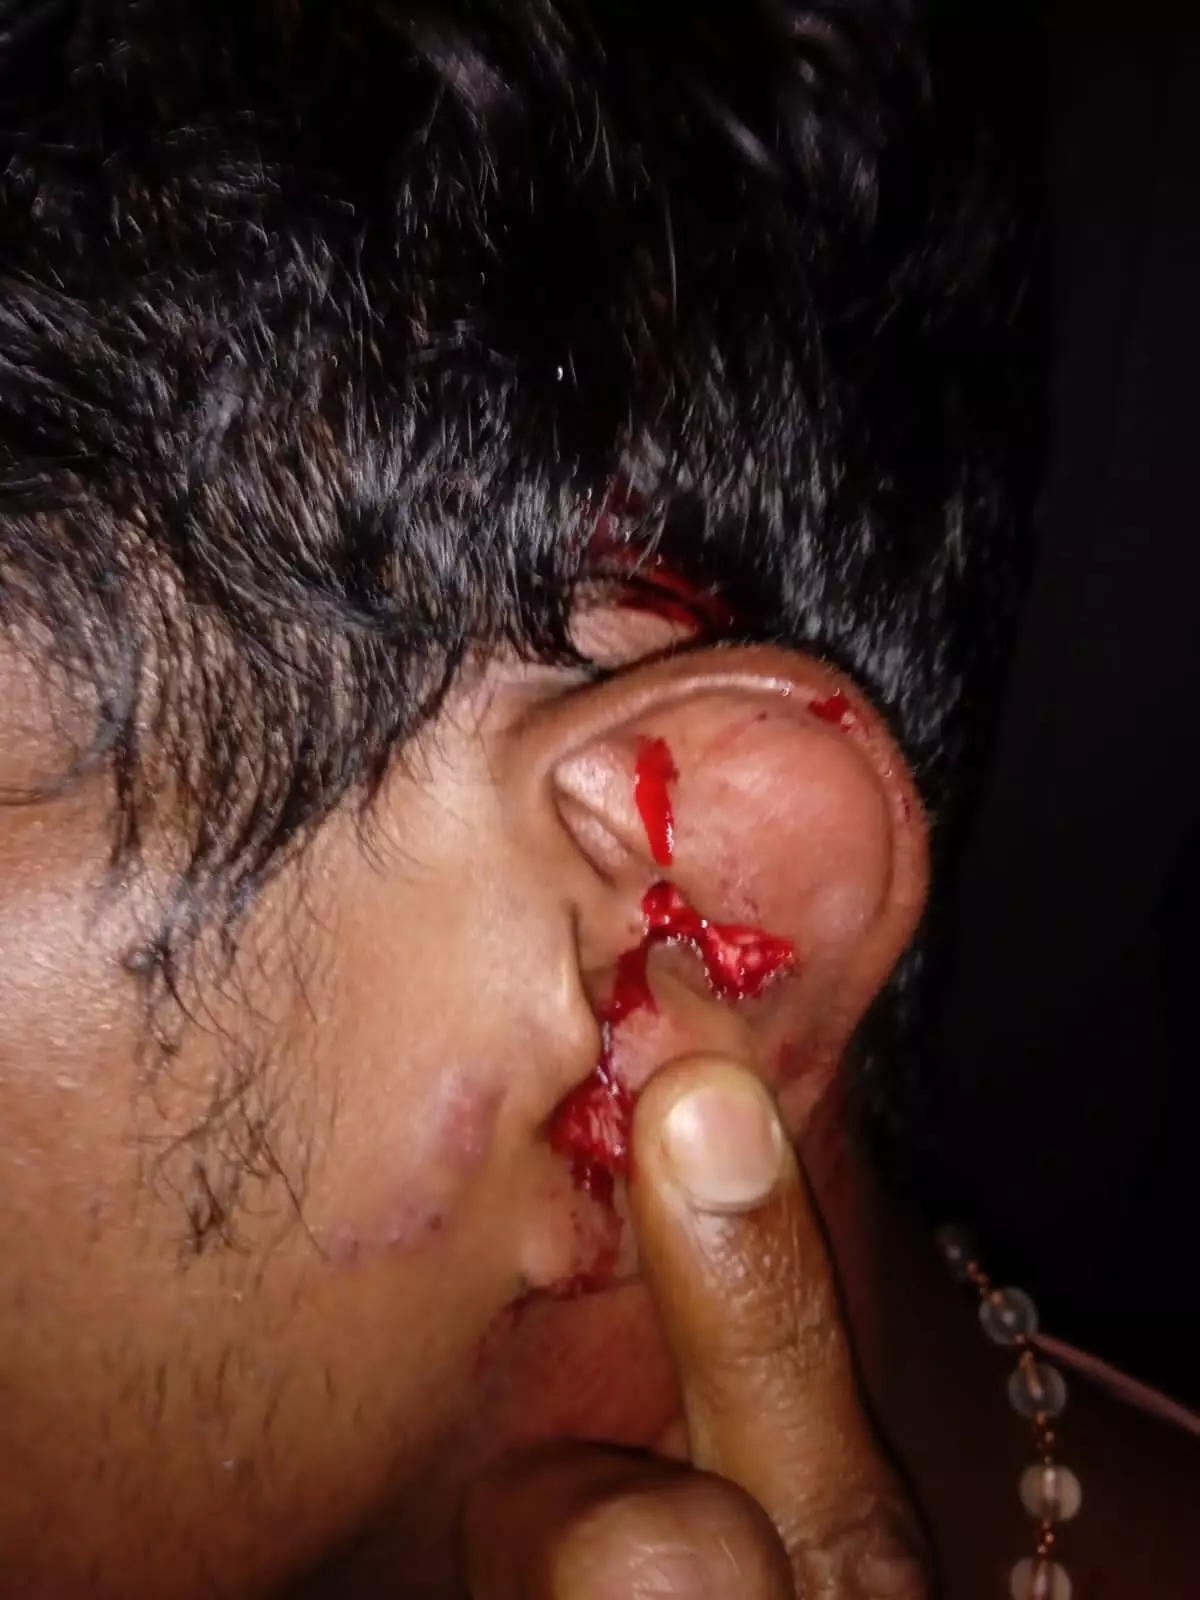  A native of Tamil Nadu had his ear ripped off in the beating